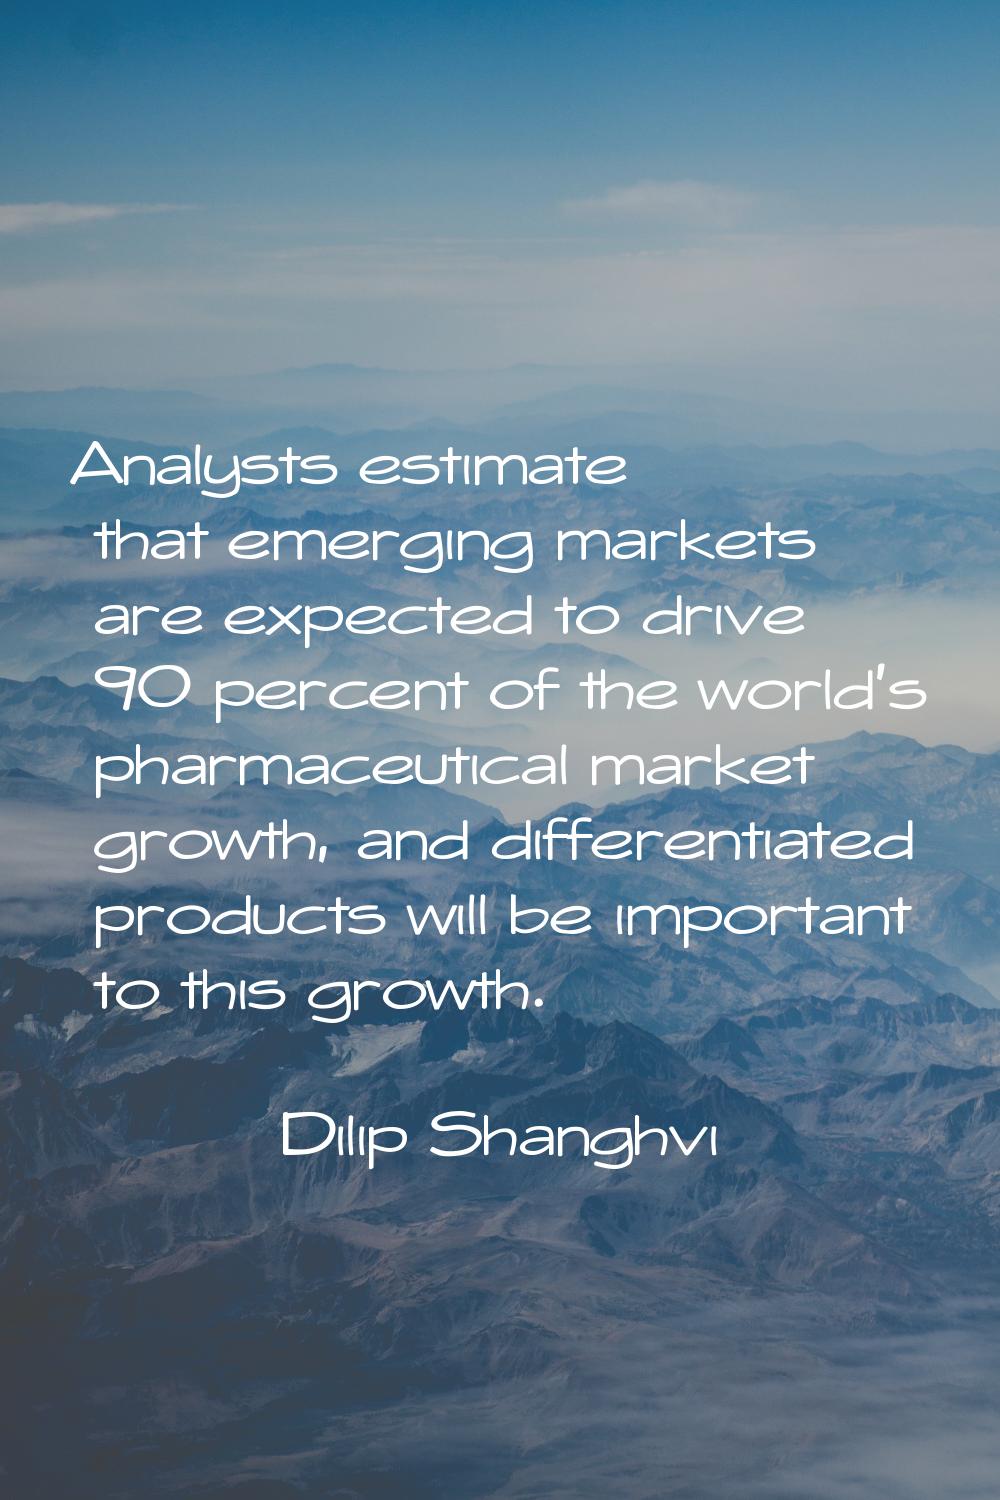 Analysts estimate that emerging markets are expected to drive 90 percent of the world's pharmaceuti